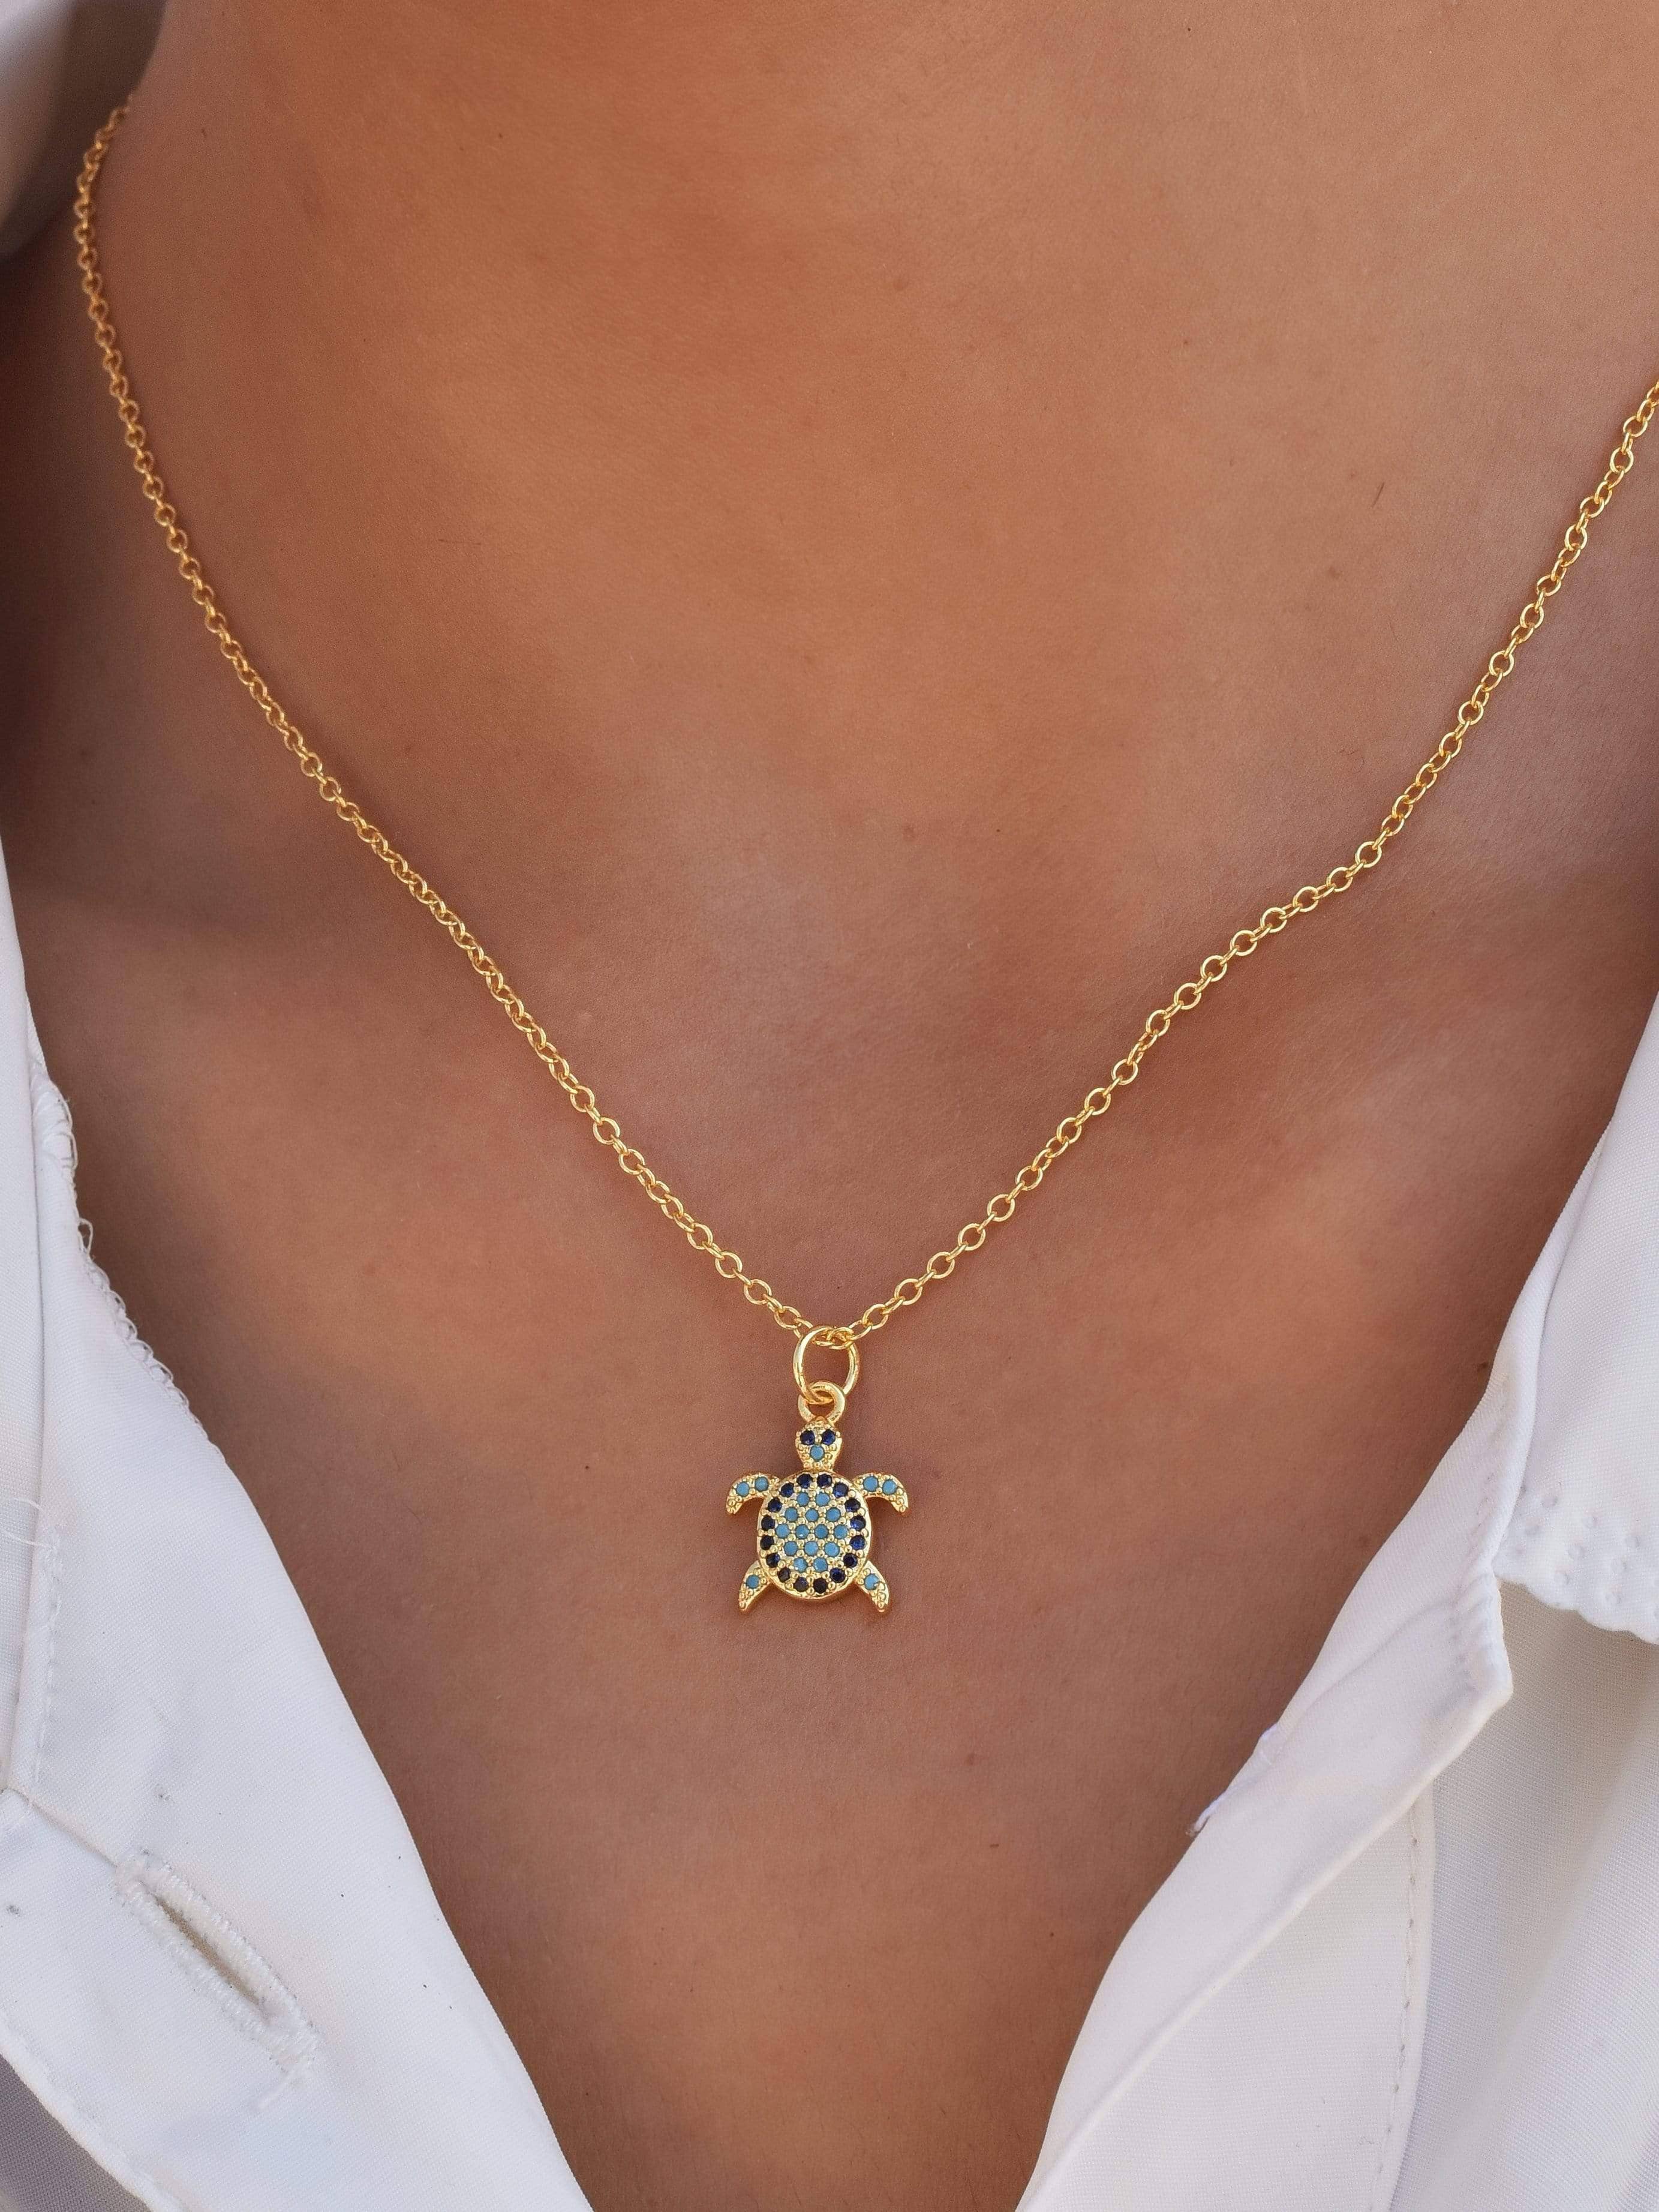 HUAIYU 925-Sterling-Silver Cute Sea Turtle Necklace - India | Ubuy